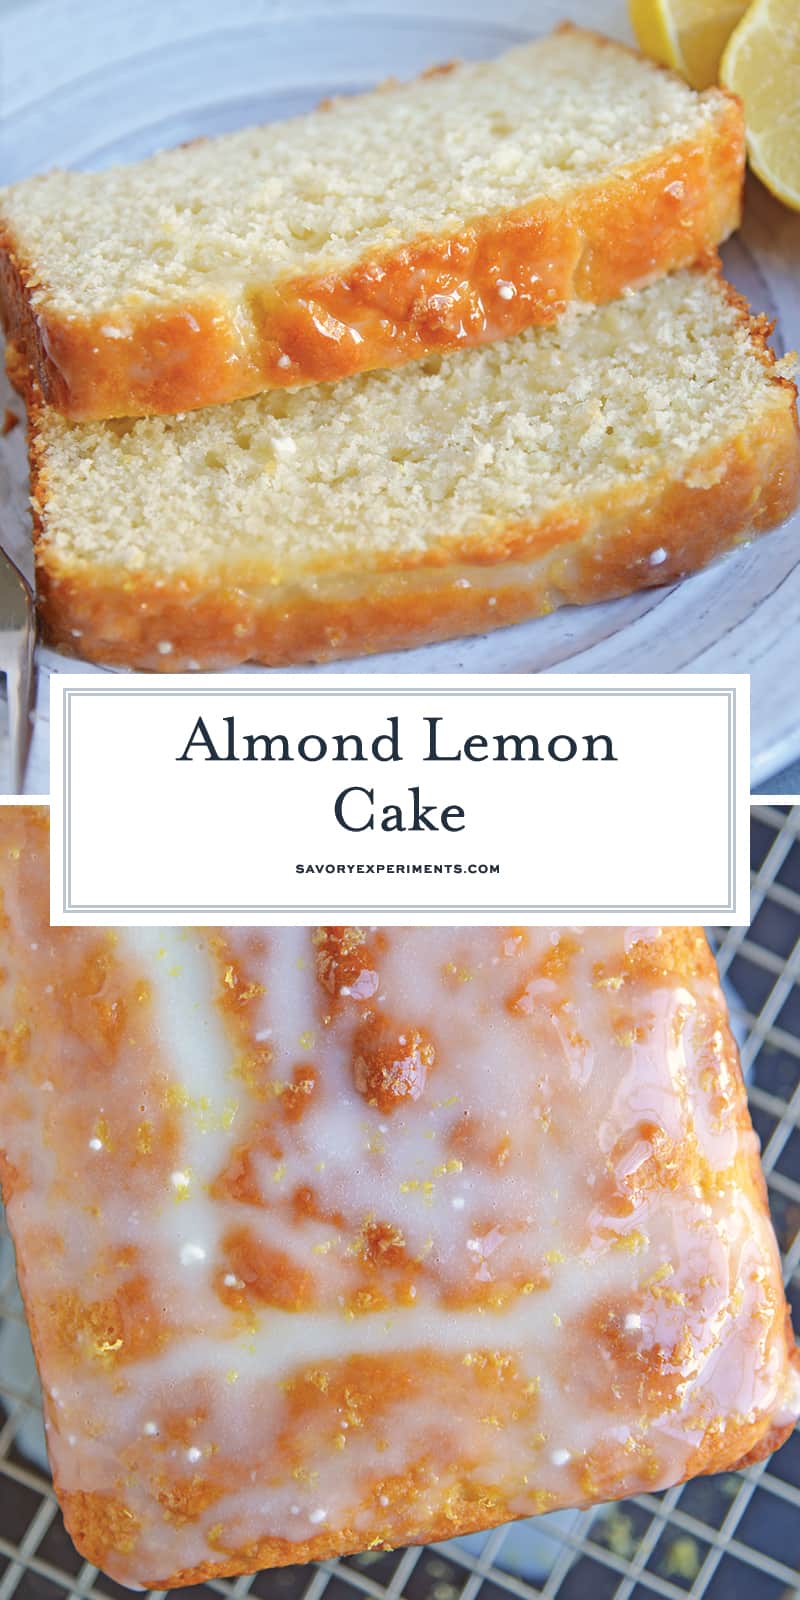 Yogurt, fresh lemon and almond give this sunny loaf cake a unique flavor and texture that everyone will love. Perfect for brunch, tea or dessert! #loafcake #lemoncake #almondcake www.savoryexperiments.com 